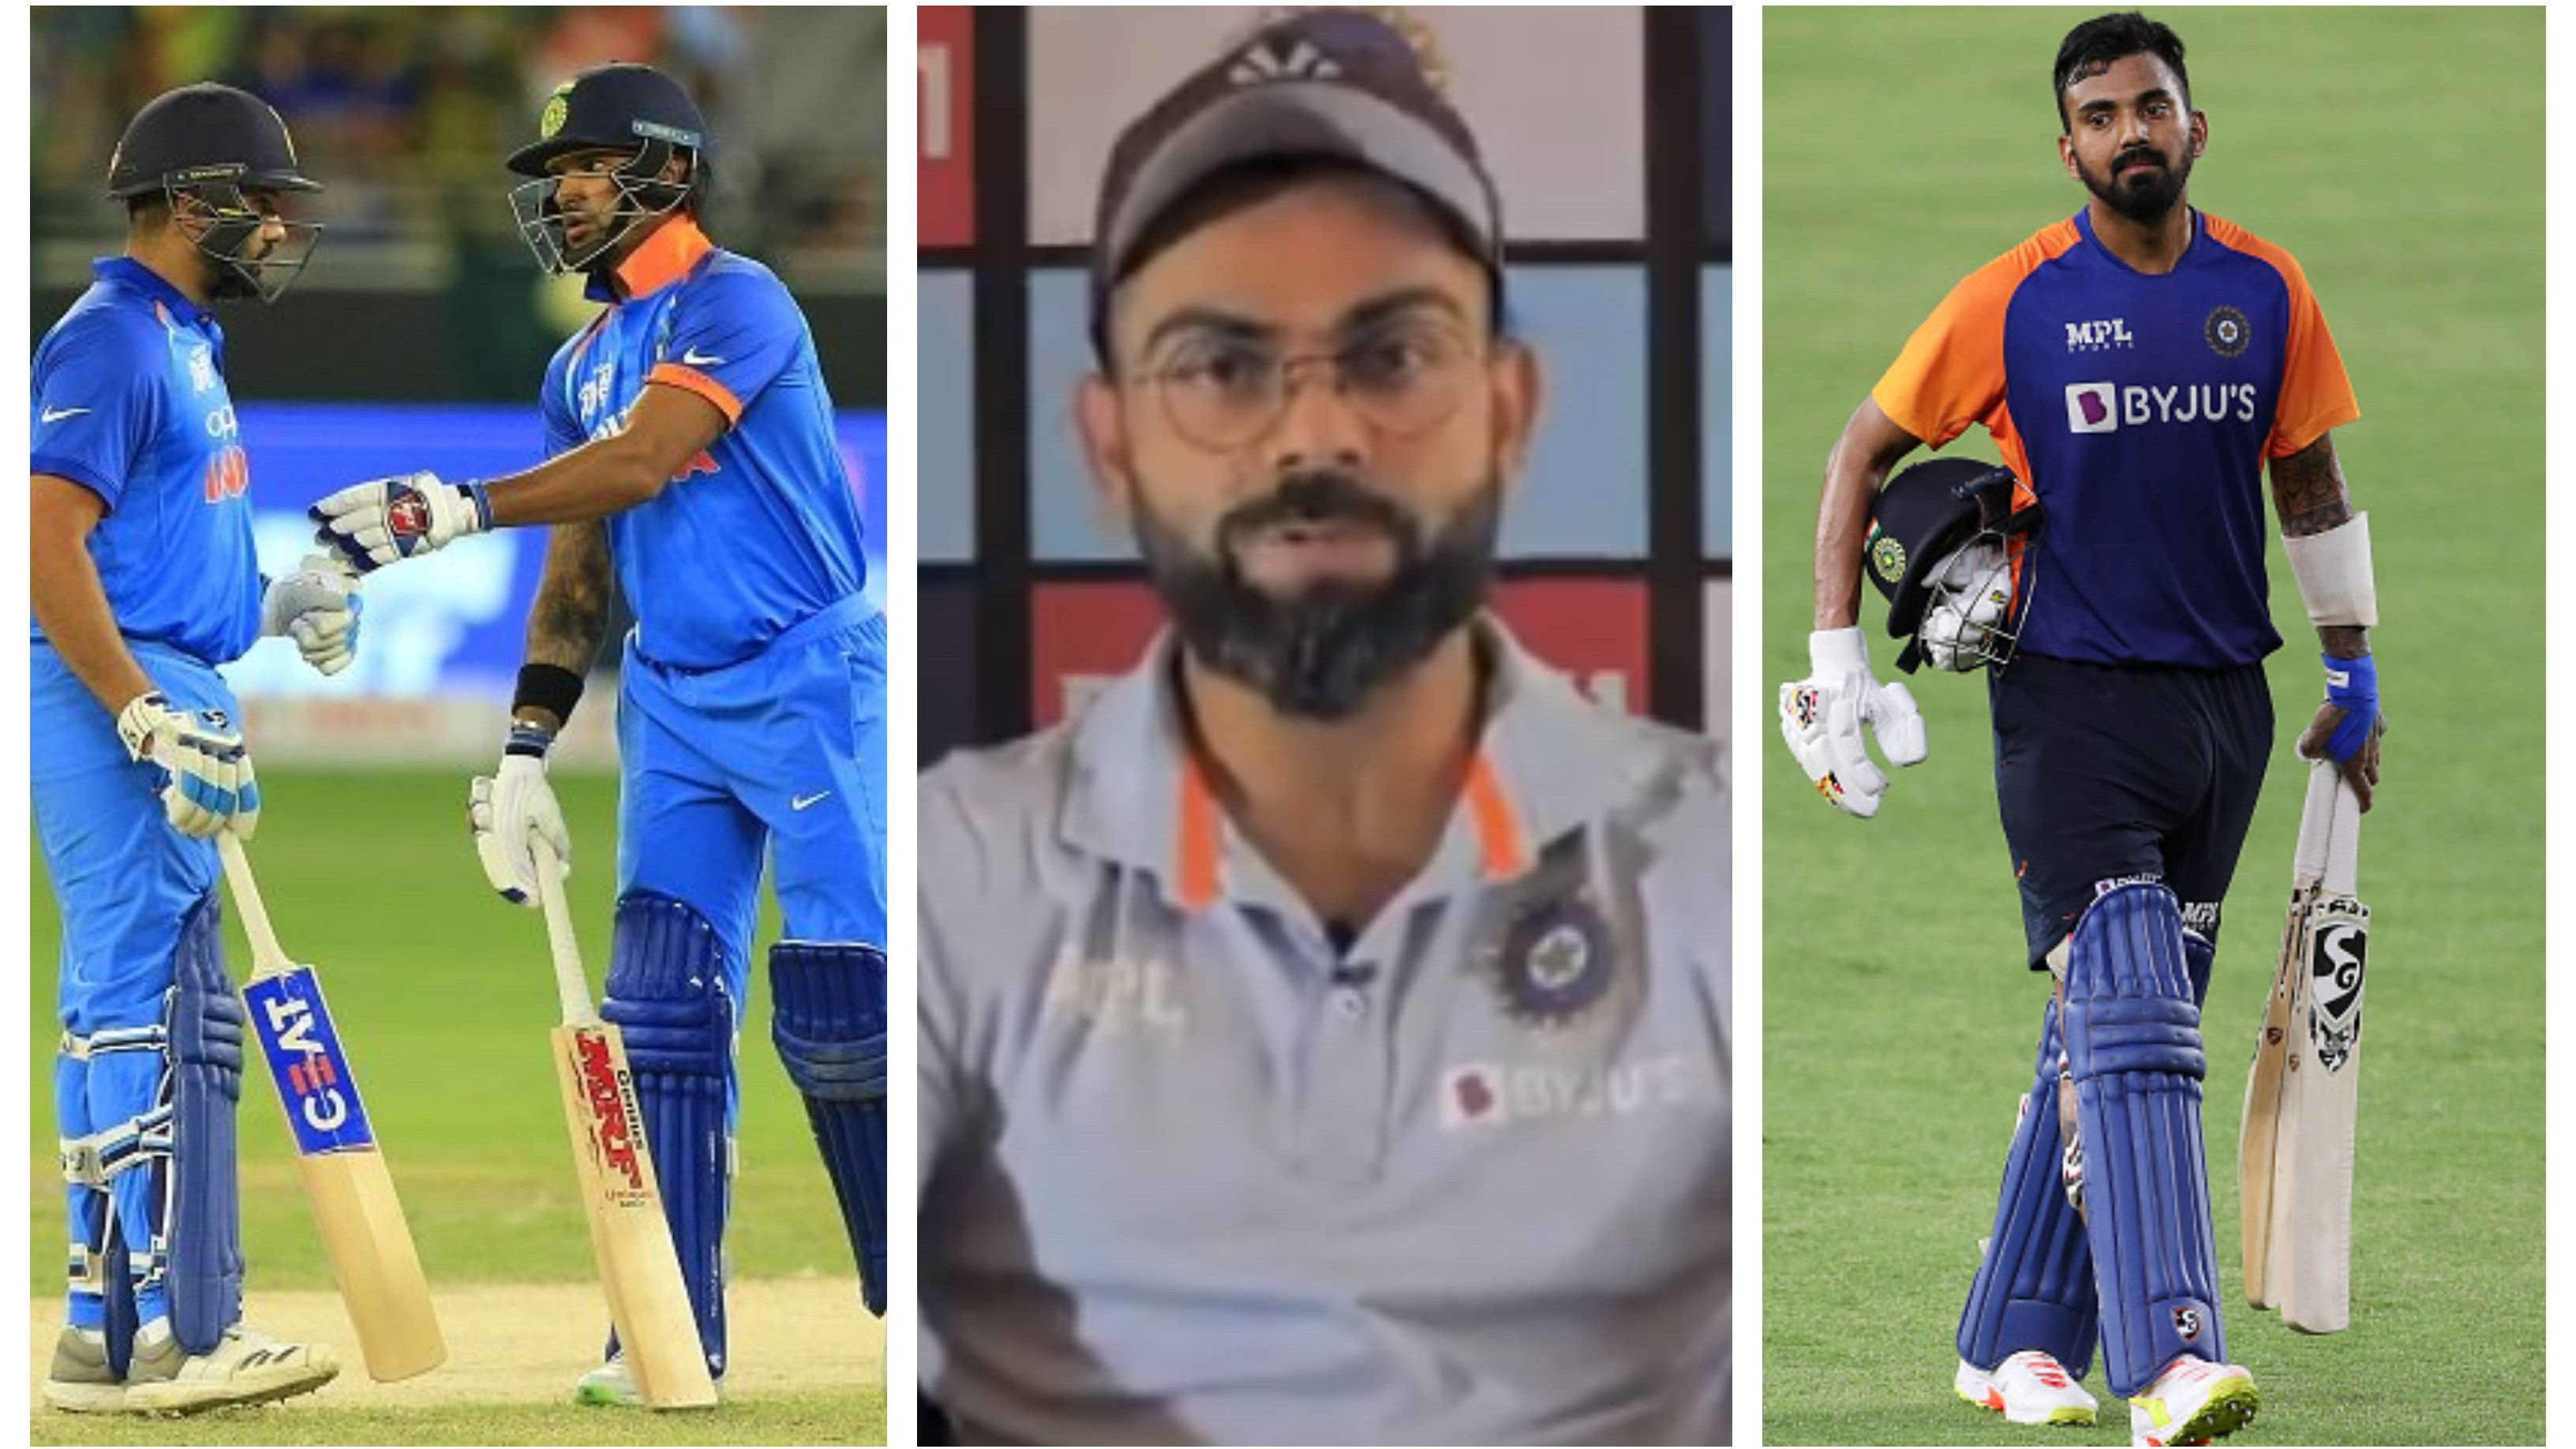 IND v ENG 2021: Rohit, Dhawan or Rahul? Virat Kohli confirms opening combination for T20I series